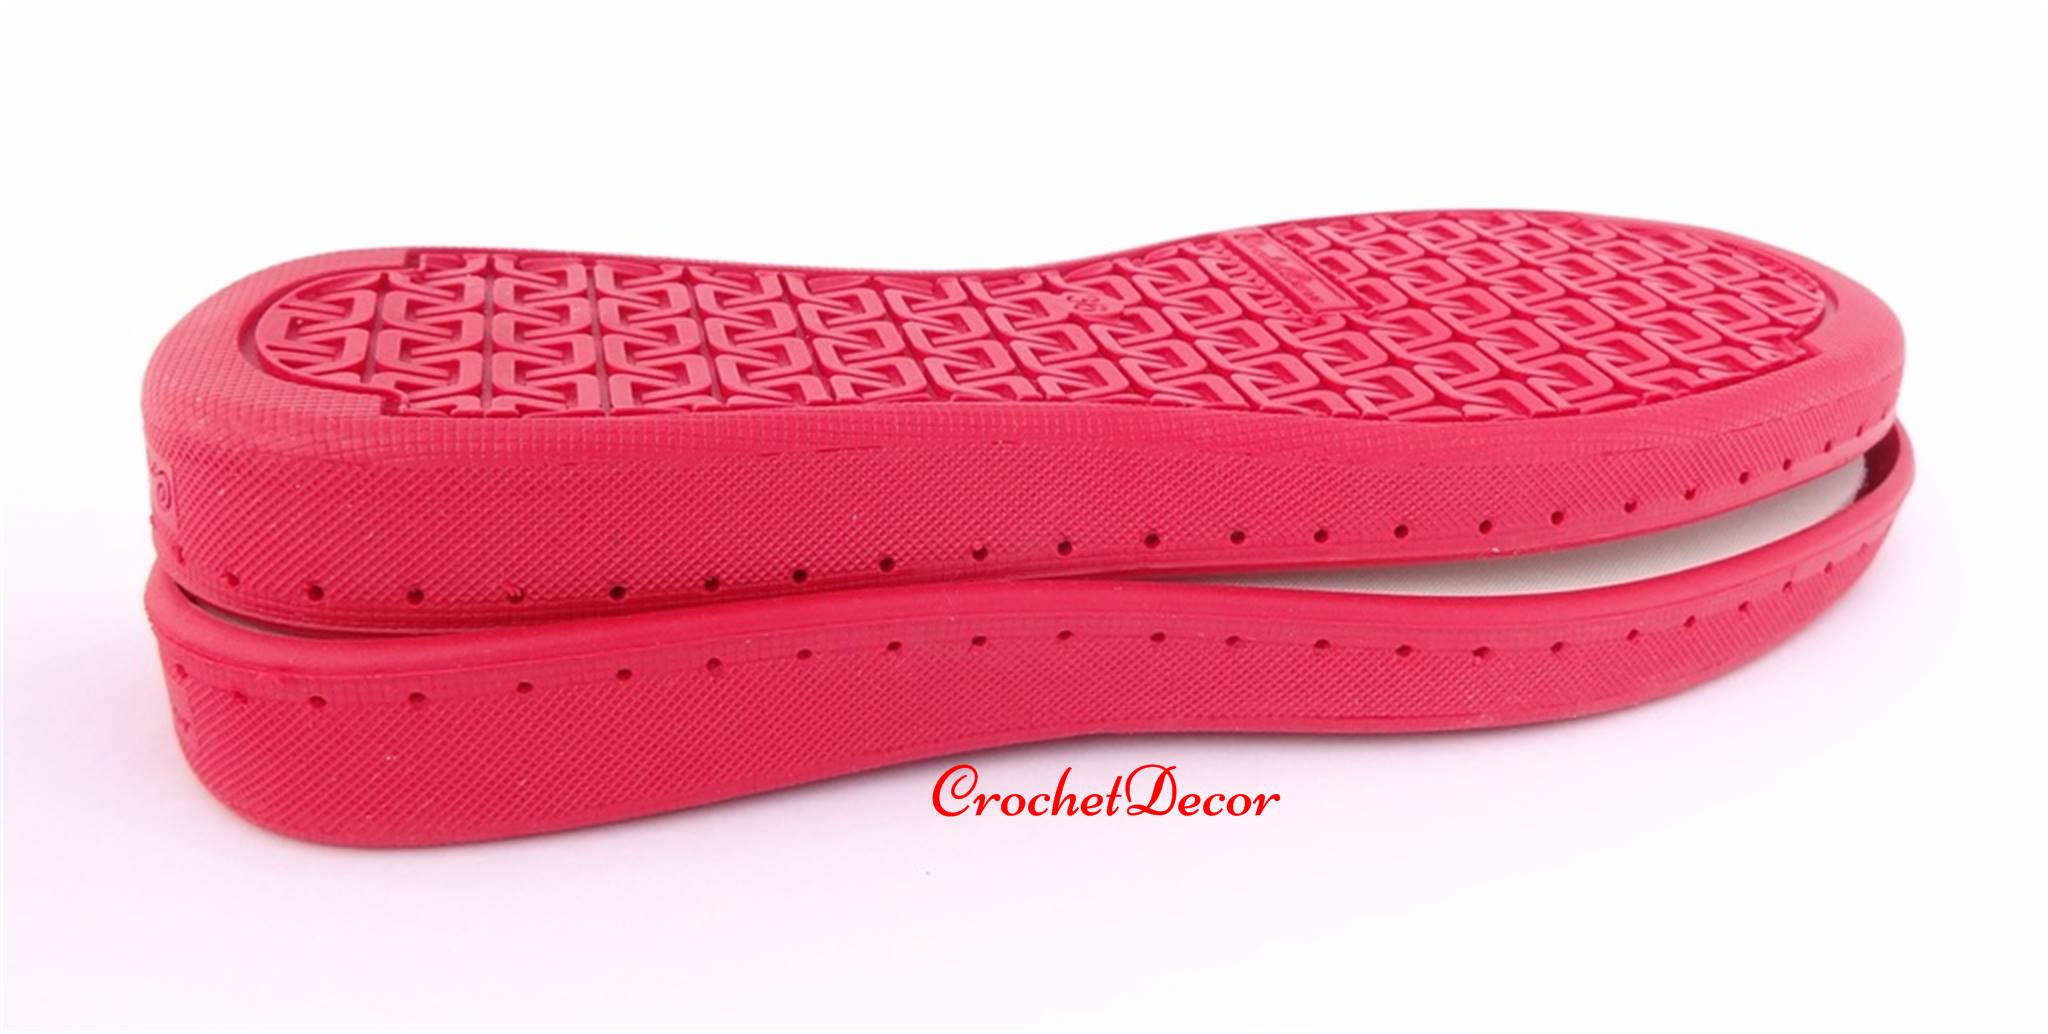 Marina Rubber Sole (Punctured) for Crocheted Shoes